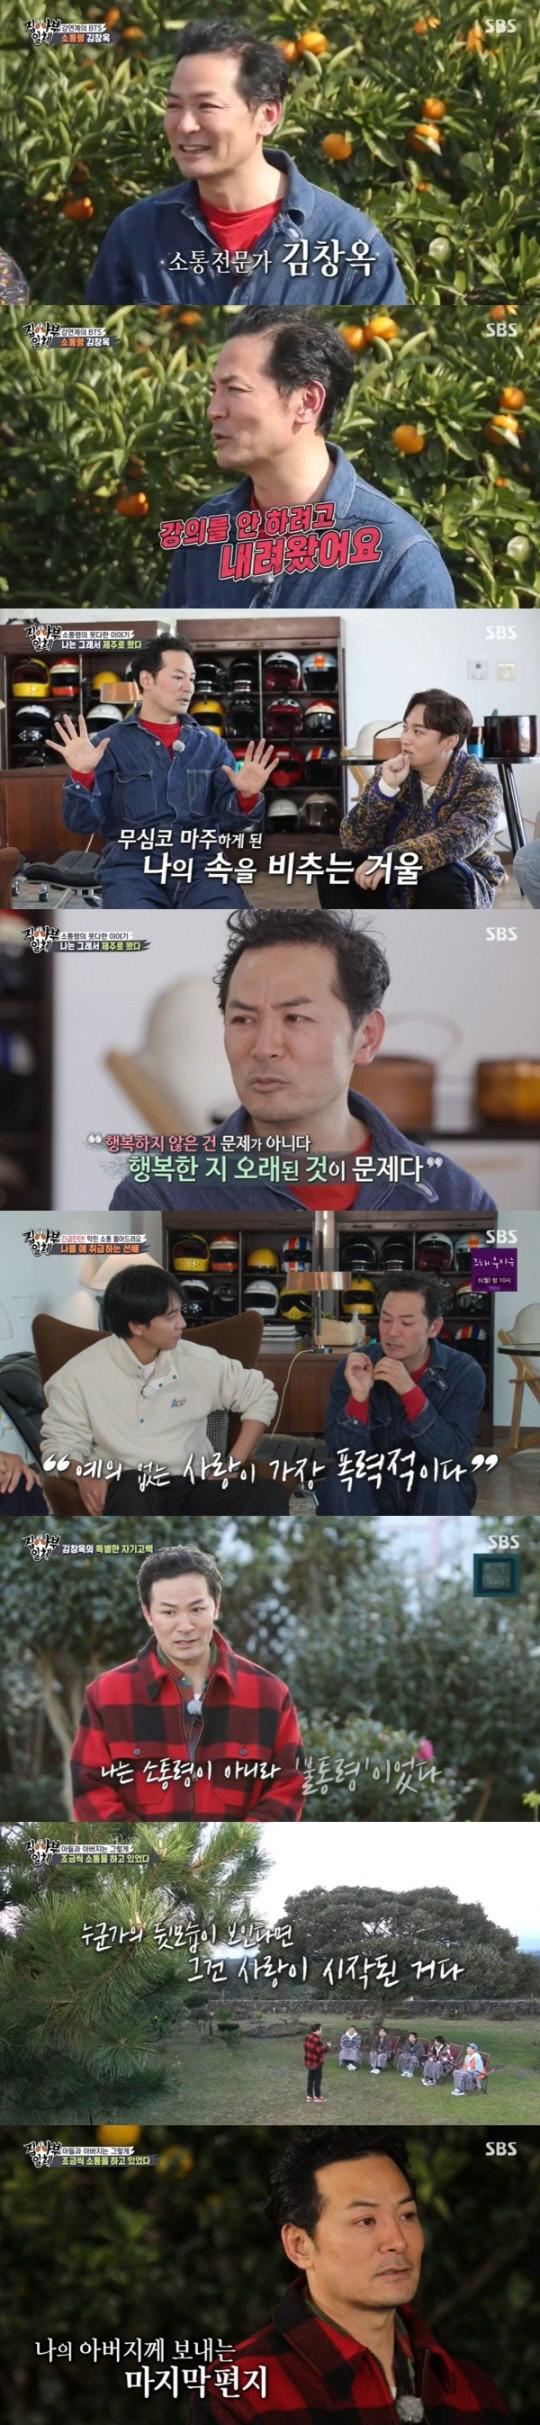 Kim Chang-ok appeared as a master on SBS All The Butlers broadcast on the 28th and said, I came down because I wanted to work at Seoul and not lecture.When Lee Seung-gi was surprised that he was retiring, Kim Chang-ok seriously replied, Retirement is a dream.I had a shocking thing to do, but Ill go home and tell you about it, he said, prompting curiosity.When asked why Yang had many chairs while visiting Kim Chang-oks house, Kim Chang-ok invited the members to his home and said, I thought (I prepared) that there was no comfortable chair for someone to sit in my mind because the lecture was a reminder.When people are Feelings hungry, they are mistaken, he said, and if they are Feelings hungry, they think they dont have anything. At first, they were shoes.I felt bored and bought a variety of things, but I could not fill my emotional hunger because only items were returned. I recently learned how to fill in hungry emotions, he said. It means that time goes fast, and Brain feels fun when time goes fast.Brain, who has been having fun, is satisfied and stressful. He said, I realized that meeting people who go quickly is how to fill their emotional hunger.Regarding the occasion for Jeju Island, Kim Chang-ok said, A middle school student who saw my lecture directly said, That person does not look happy.I was angry when I heard that. I realized that I was embarrassed because I was not angry.It is not a problem that is not happy, but it is a problem that is old since it is happy. Thats when a friend suggested a Jeju Island route, he said.People think that if things go well, there is no problem with the soul, he said, adding that it is important to look back on themselves in the middle of the day.Lee Seung-gi said, There is a person who can not communicate. Some of the seniors who have made their debut in 2004 and have seen me since their debut still treat me as a high school student.I am worried about whether we should stop contacting them, Kim Chang-ok said. Love without courtesy is the most violent, he said. The first gateway to human relations seems to be courtesy, not love.If you are a healthy person, you will be more polite. I was a non-communicator, not a communicator, he began, and my father is deaf. When he drank, he quarreled with his mother, and if he didnt, the conversation was cut off.For me, my father was a scary person, so I wanted to leave my hometown of Jeju Island since I was a child. As a result of his improved relationship with his father, he said, I worked at Seoul and I was called to ask what dentist in Jeju Island could pay for my fathers implants and neurotherapy.But suddenly my father asked me to change the phone and said, Are you a fool? Its my father. Im sorry.I thought he was not Feelings this way, but he was Feelings weak, he said. That phone changed my father too.He came all the way to see me out.Looking at my fathers Model, Back View, I wrote, Love started when I saw someones Model, Back View, thinking, My father is an old man.The relationship has improved since then.My father is in critical condition, and I have been communicating with him a little bit, so it is difficult to send him away, but I think he can send him away without difficulty.The first treatment for pain is sorry, he said, and there can be no communication without apology.Kim Dong-Hyun, who had a red eye as he confided in his relationship with his father, said, When I love someone, I understand the love I received.In his last letter to his father, Kim Chang-ok said, I have been understanding that I have spent my fathers time for many families for a long time.I will take good care of my mother and live well. Photo SBS All The Butlers screen capture